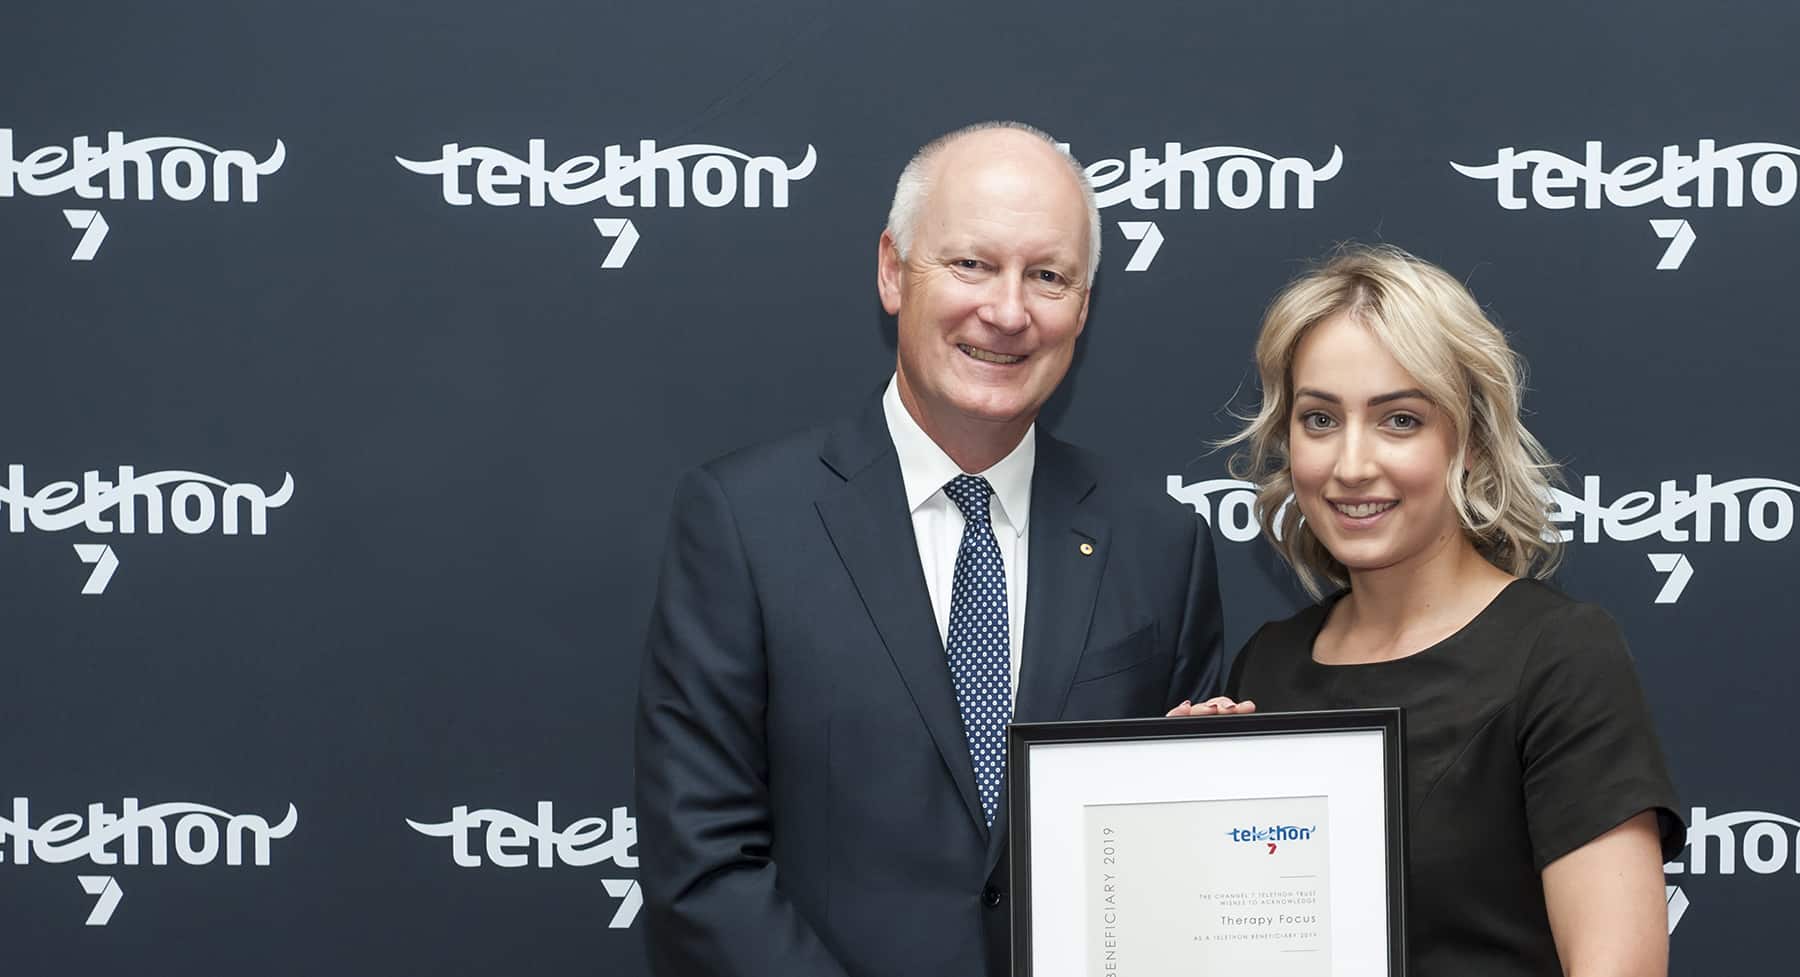 Therapy Focus employee holding certificate with Telethon Chairperson